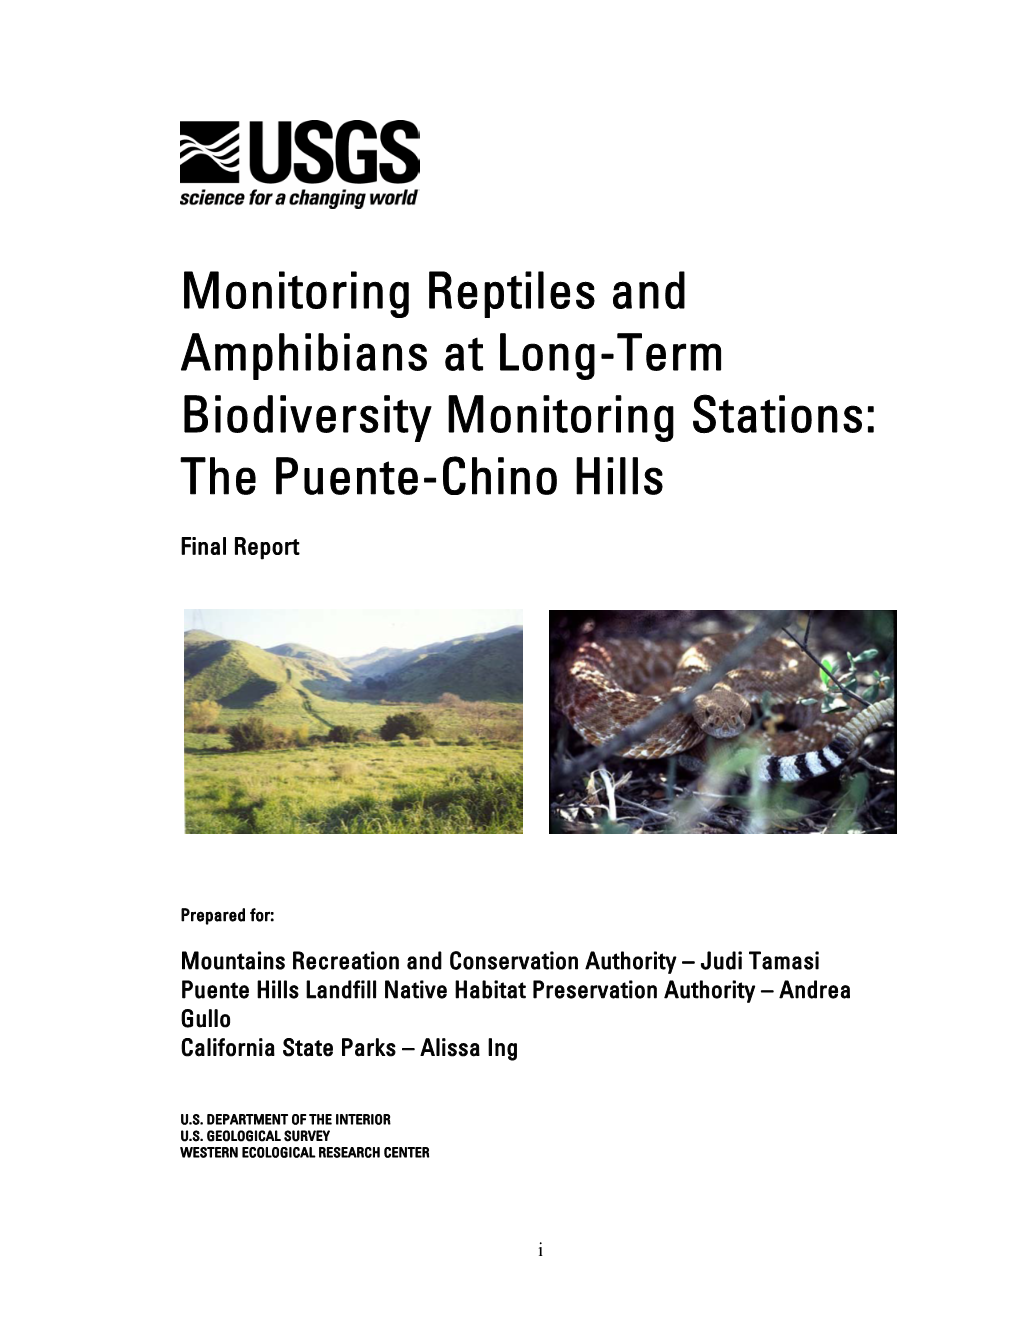 Monitoring Reptiles and Amphibians at Long-Term Biodiversity Monitoring Stations: the Puente-Chino Hills